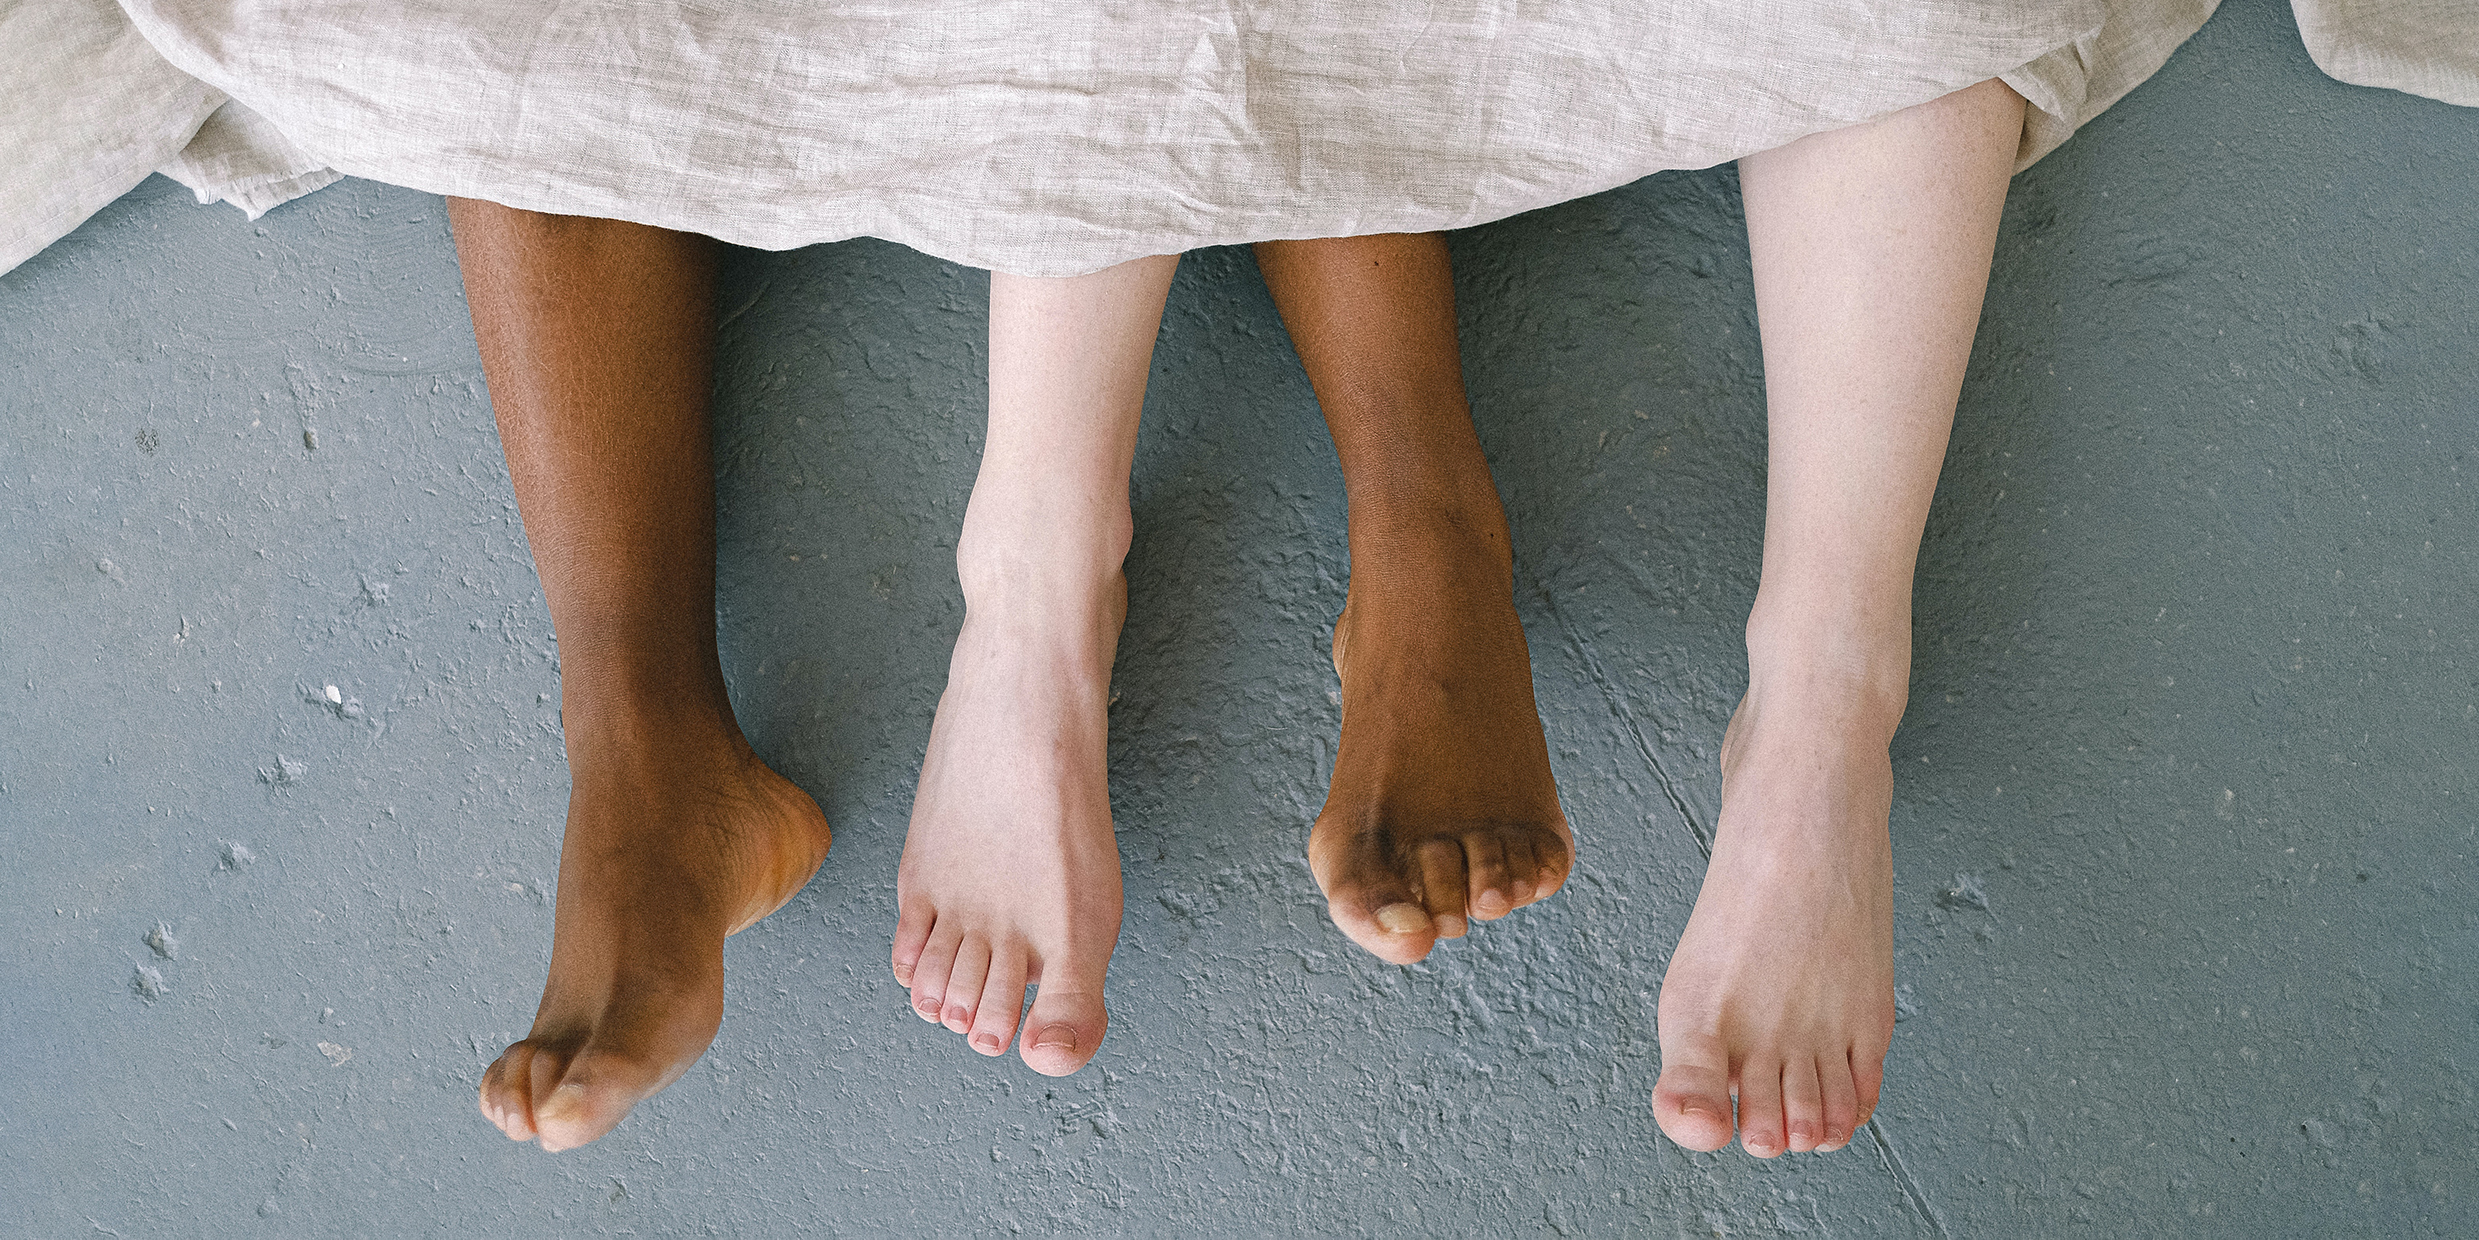 Image of two pairs of bare feet emerging from under bed sheet